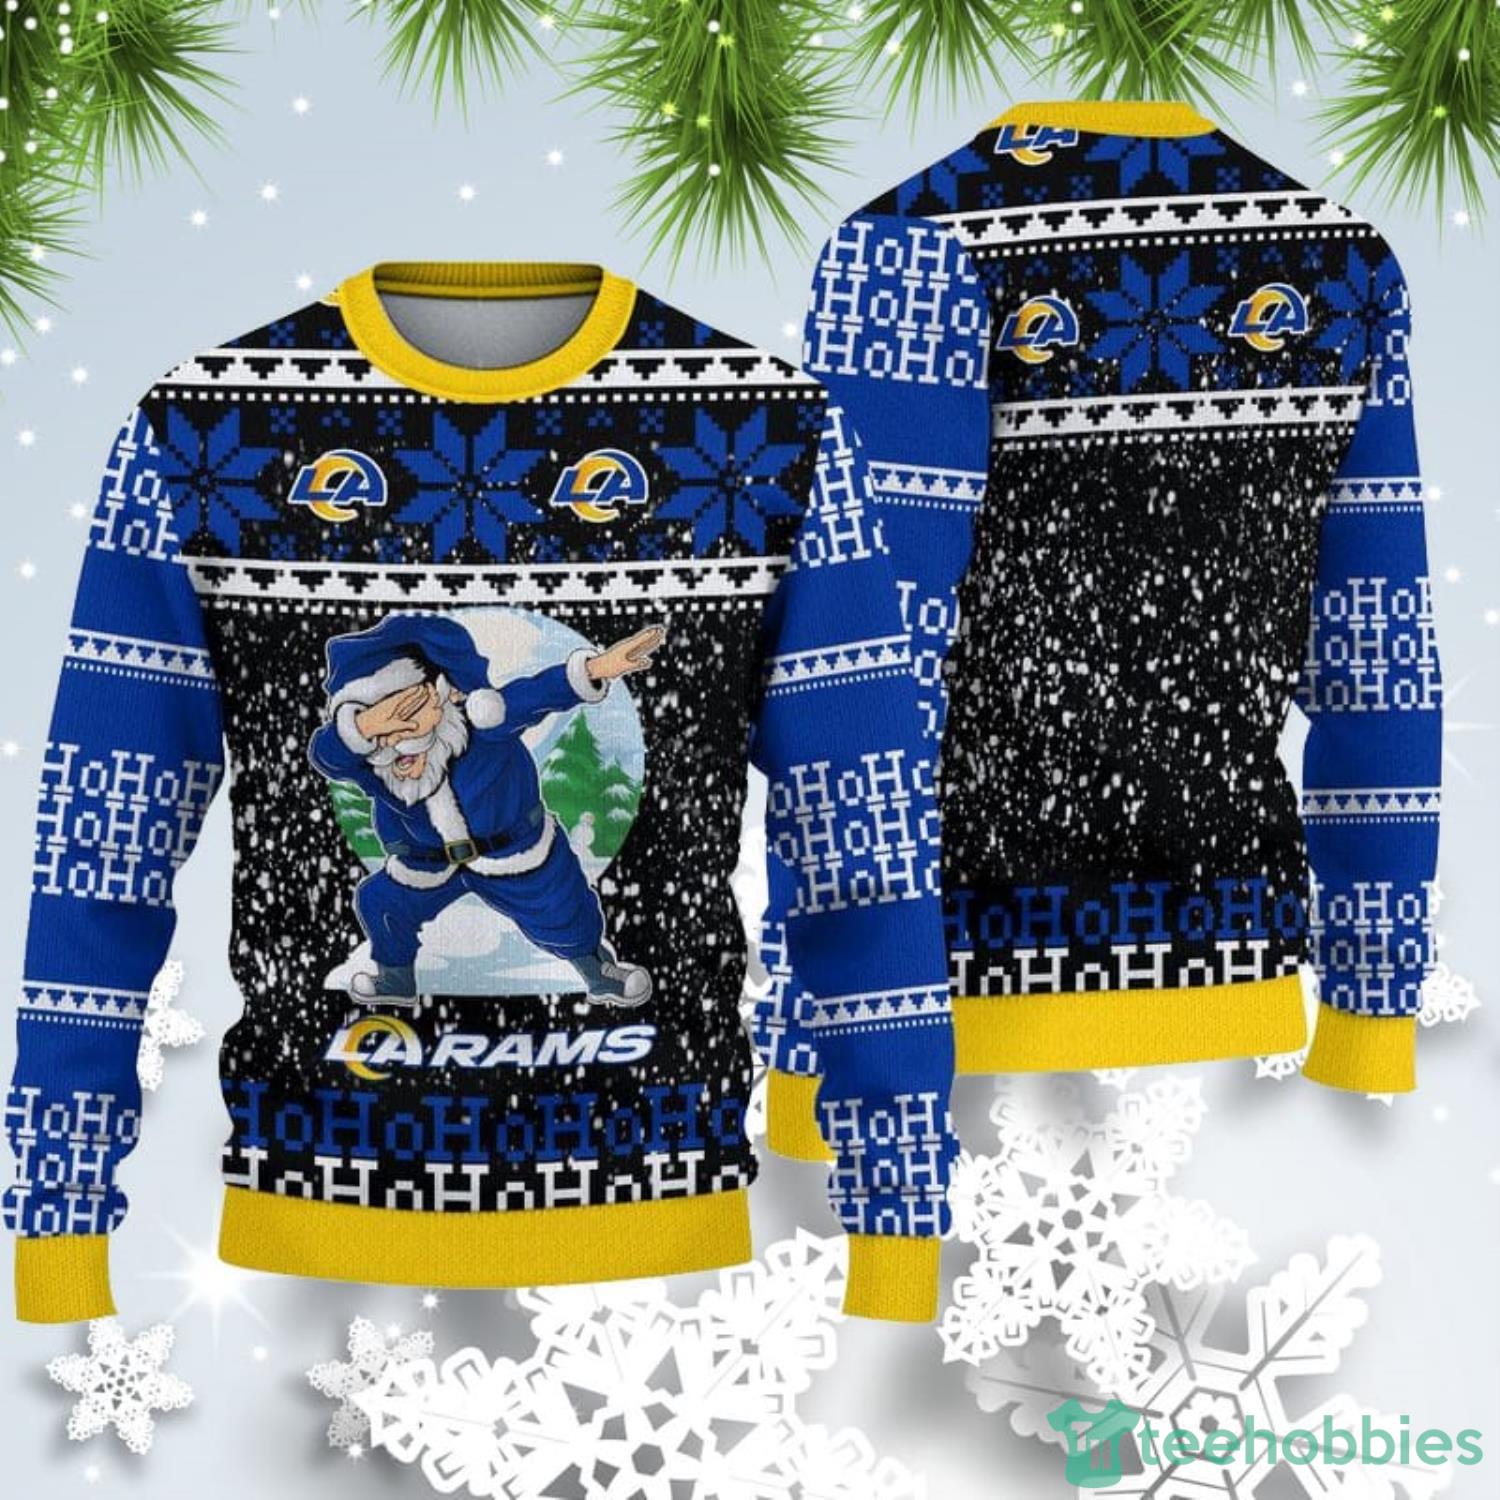 Los Angeles Dodgers Skull Flower Ugly Christmas Ugly Sweater - Shibtee  Clothing